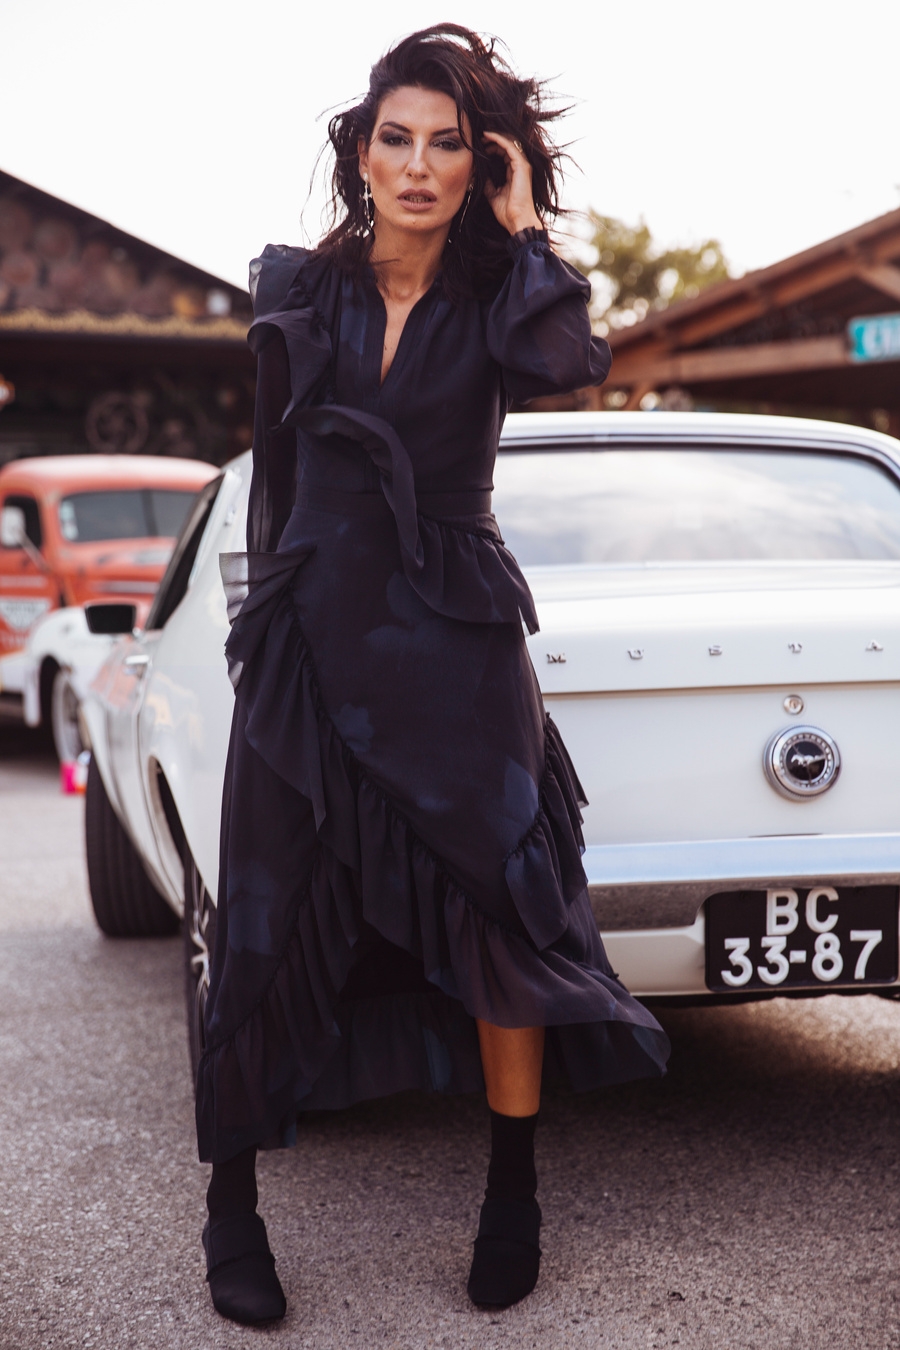 A woman wearing a long black dress and black boots stands next to an old car